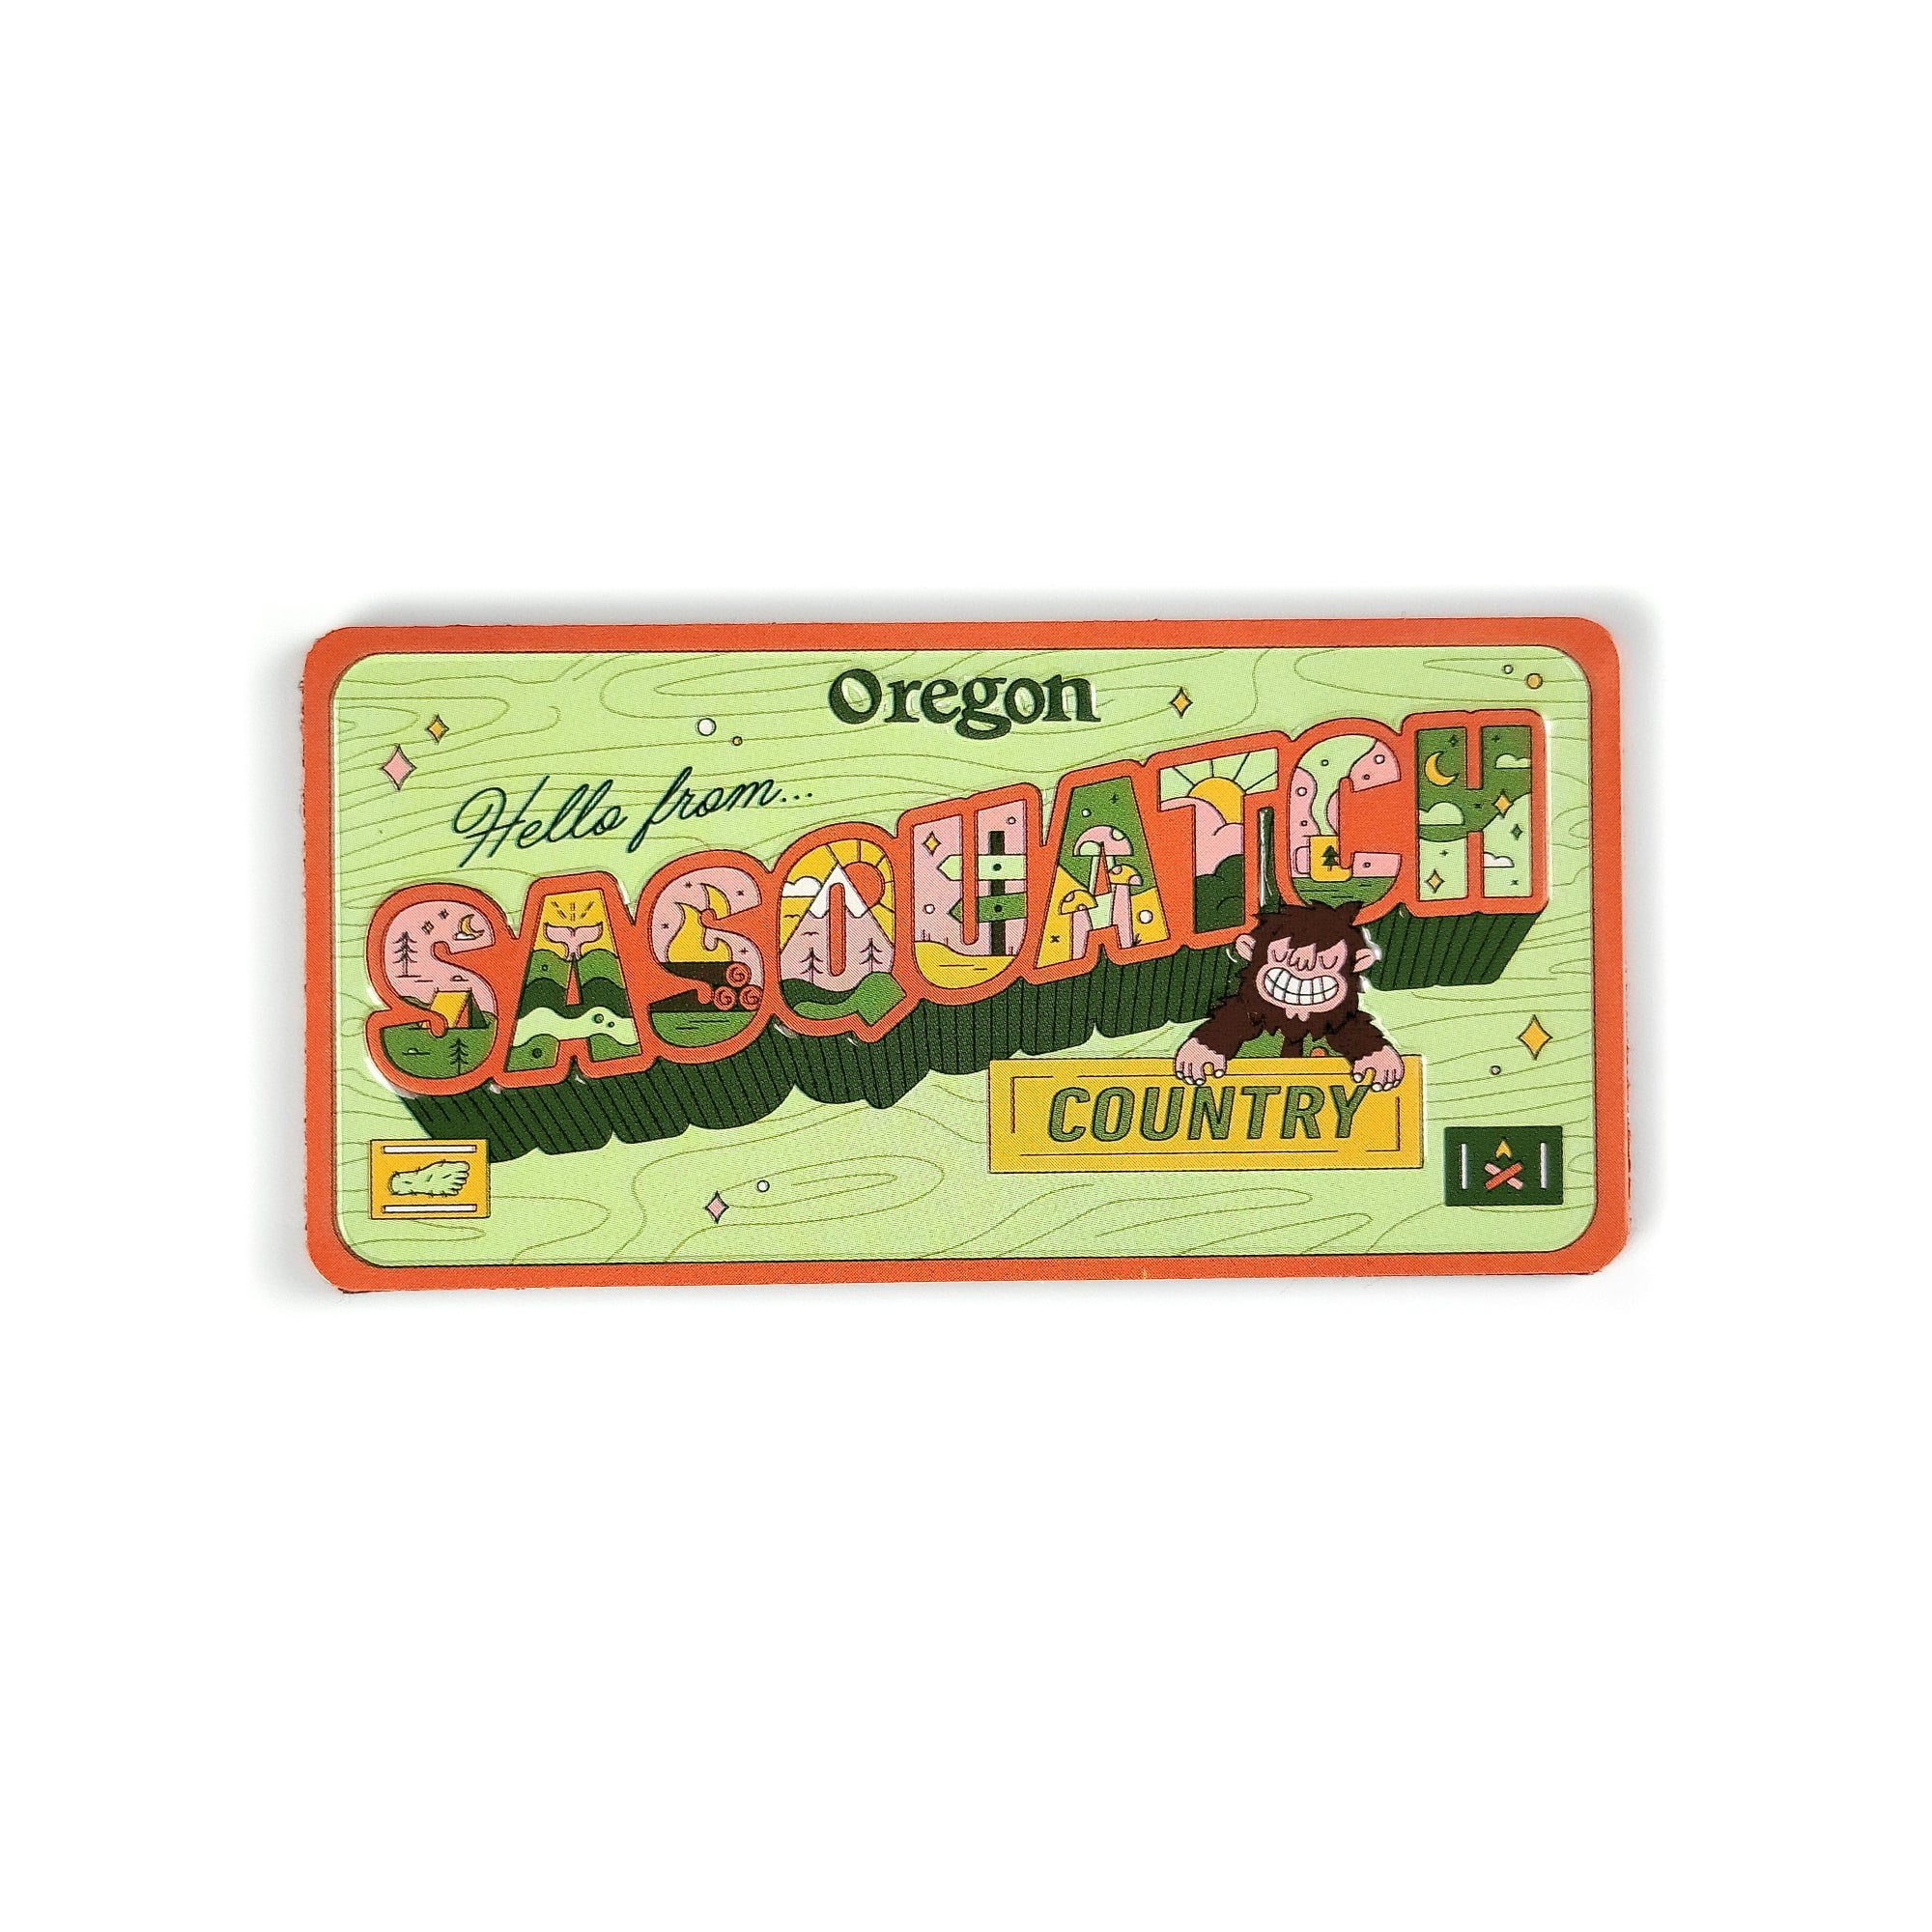 Hello From Sasquatch License Magnet - Magnets - Hello From Oregon